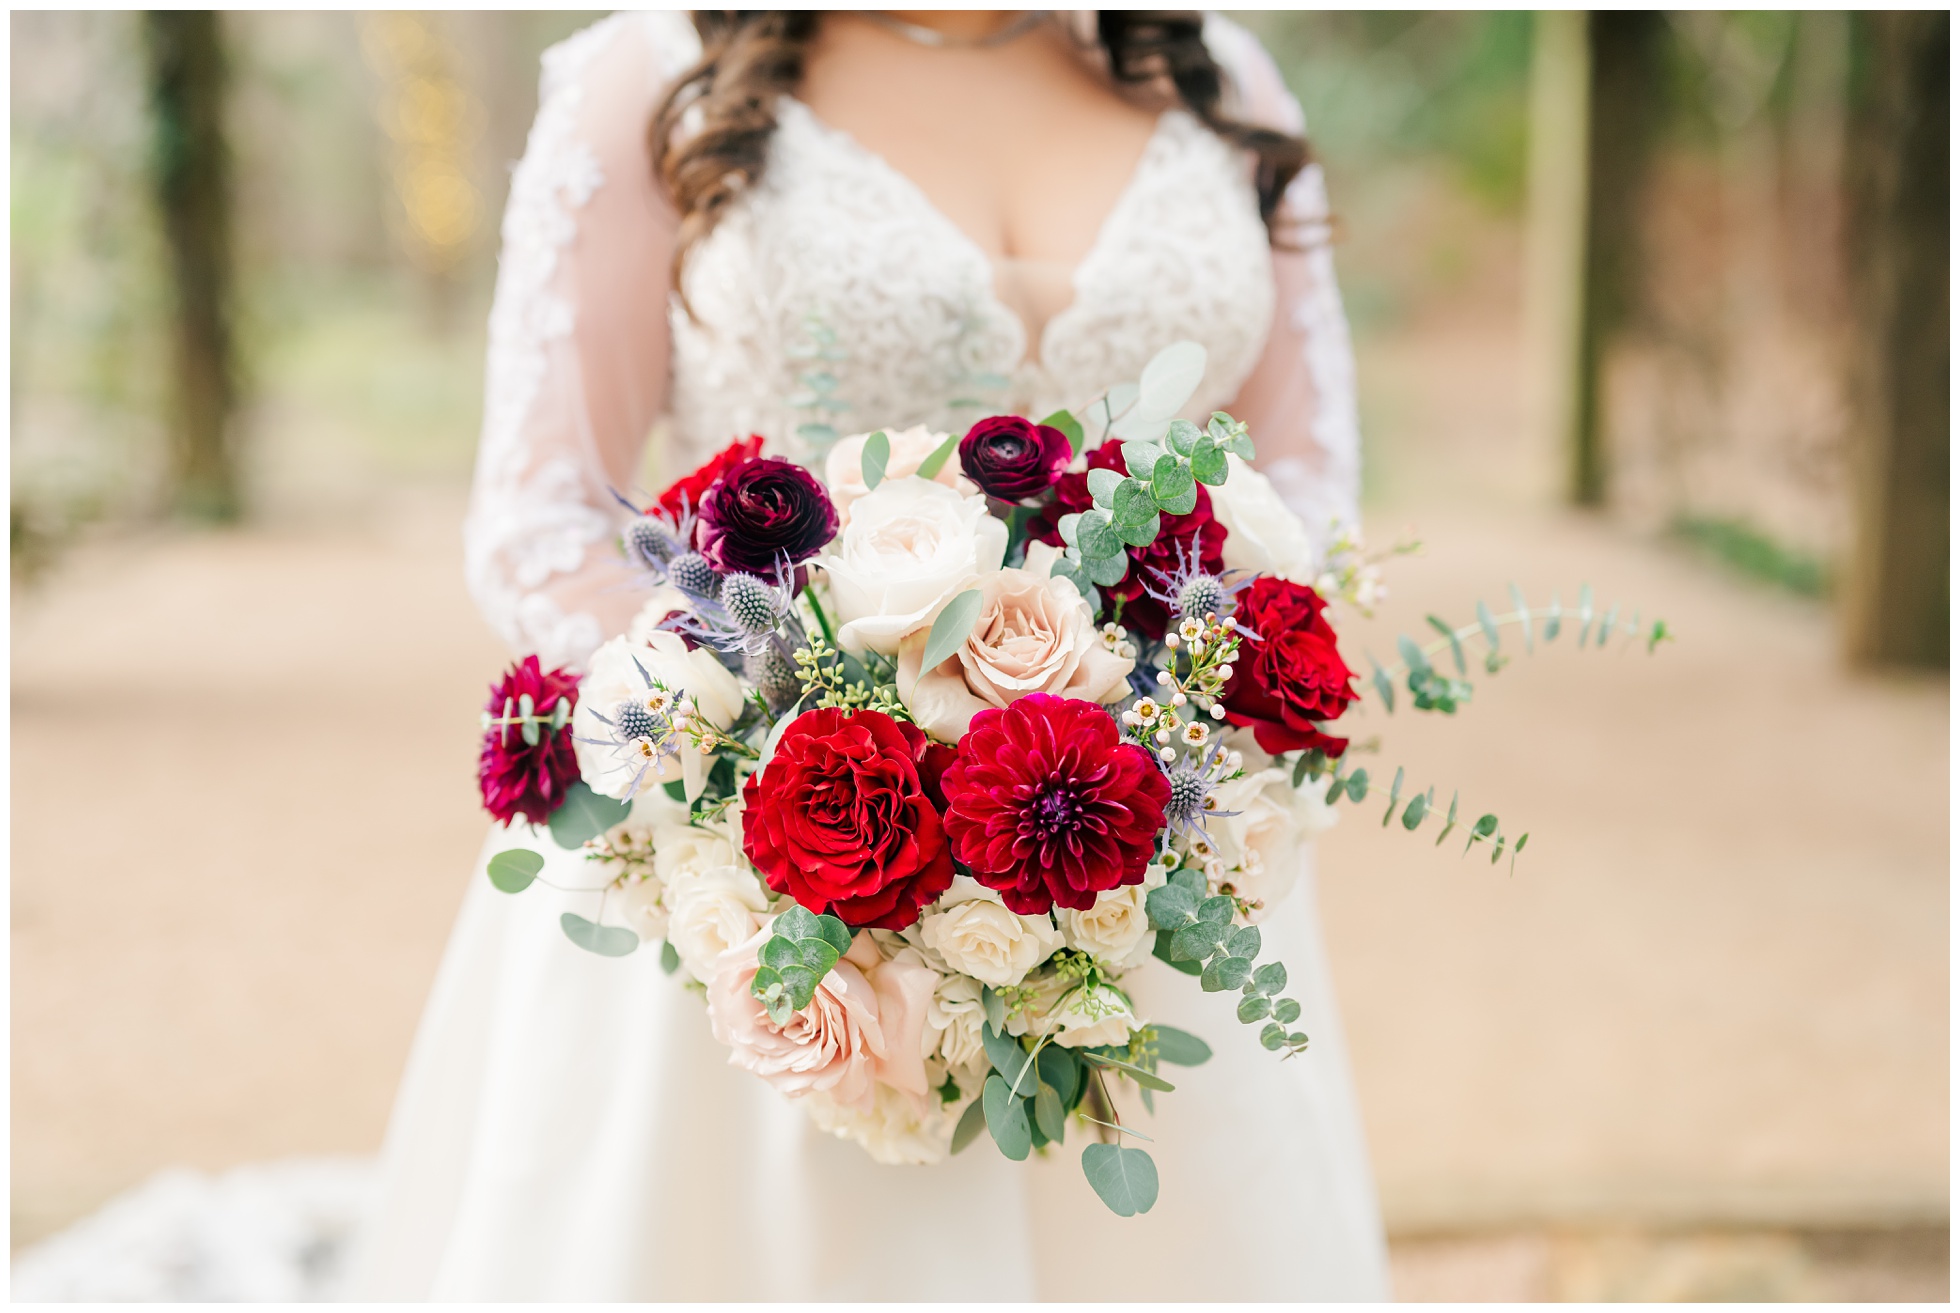 Bride's bouquet of red, pink, and white florals by HEB Blooms magnolia.